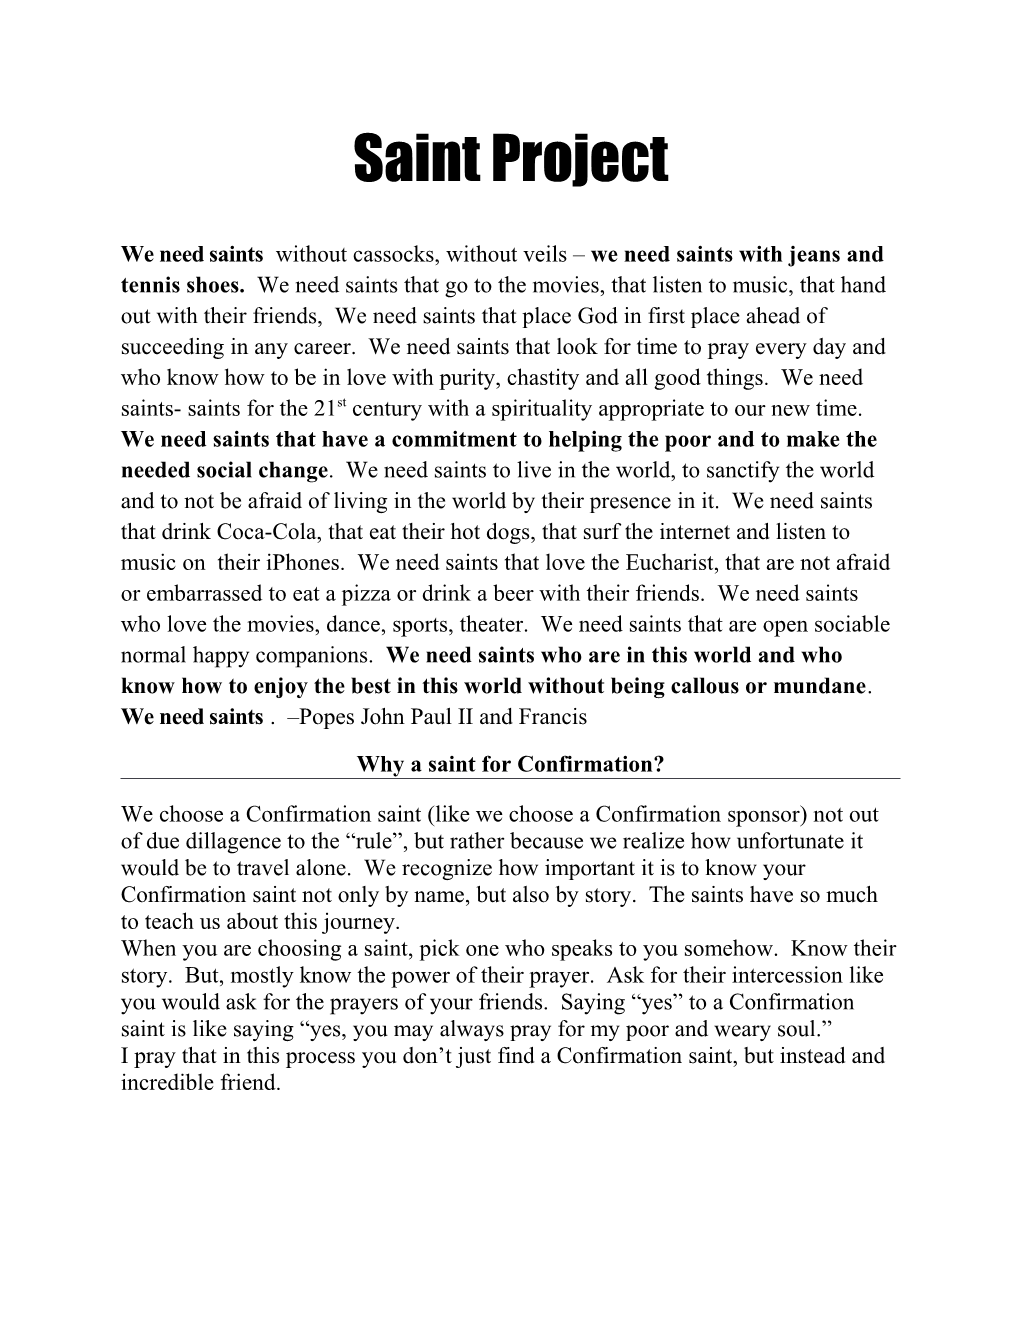 Why a Saint for Confirmation?